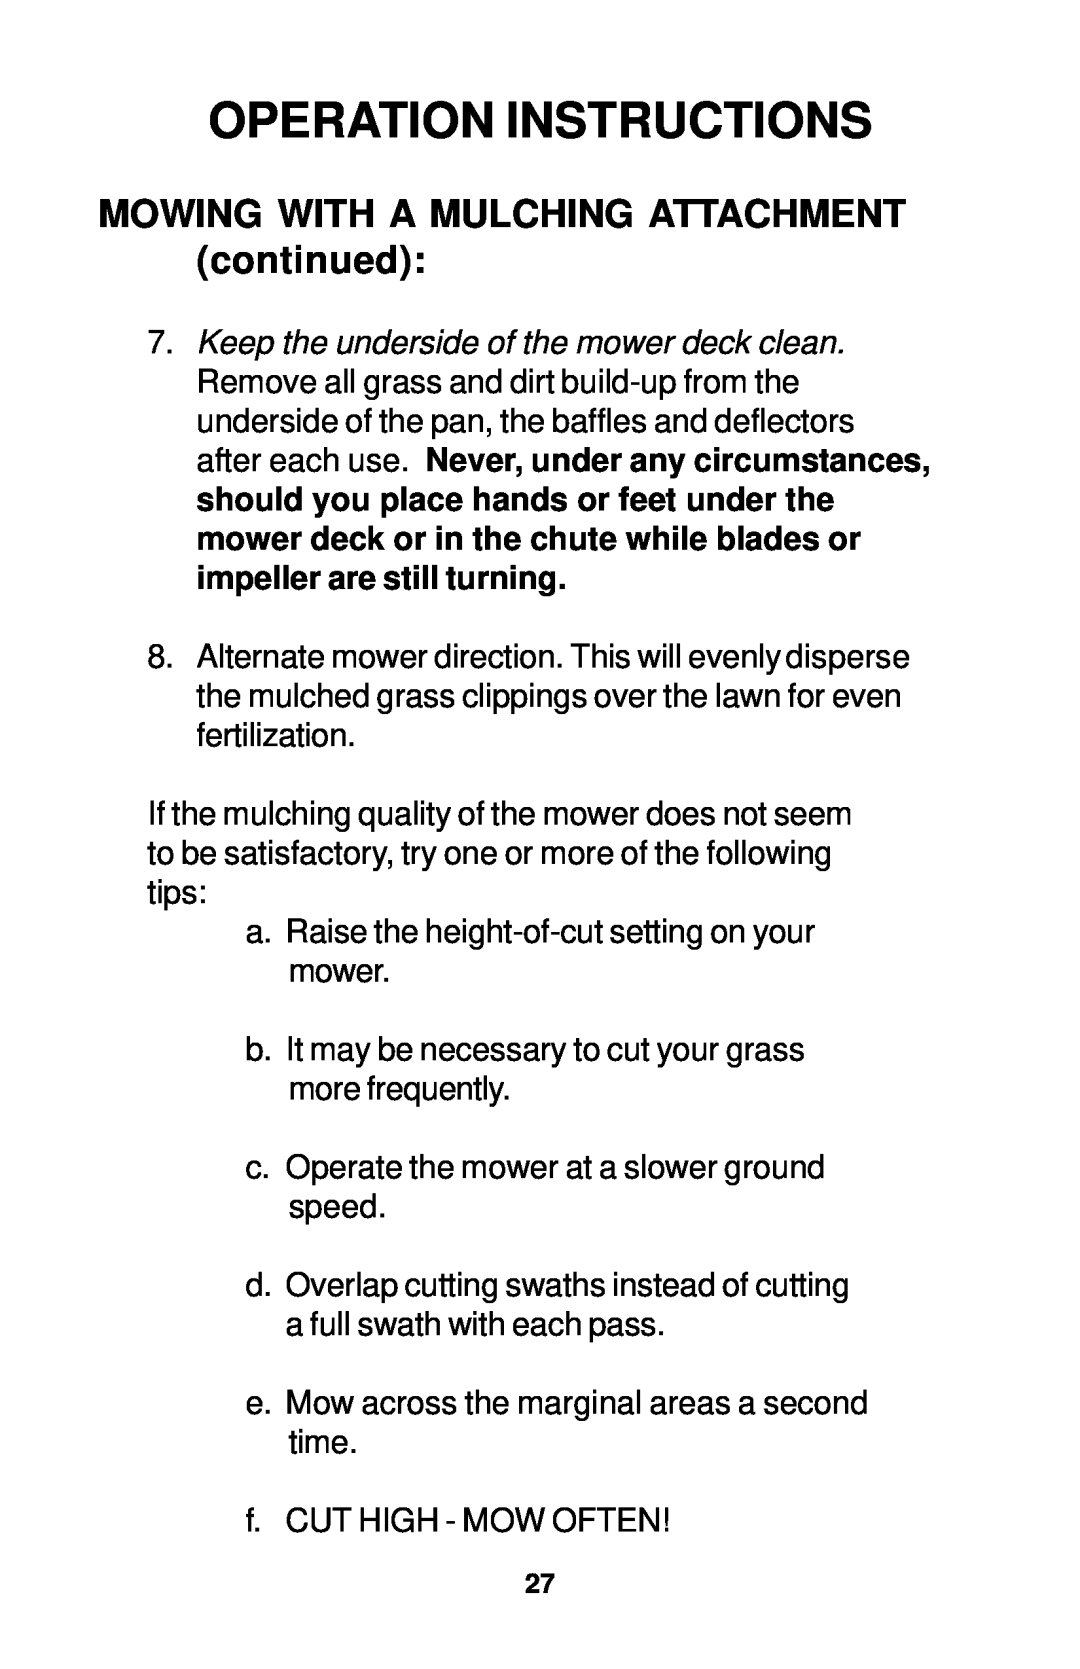 Dixon 18134-1004 manual MOWING WITH A MULCHING ATTACHMENT continued, Operation Instructions 